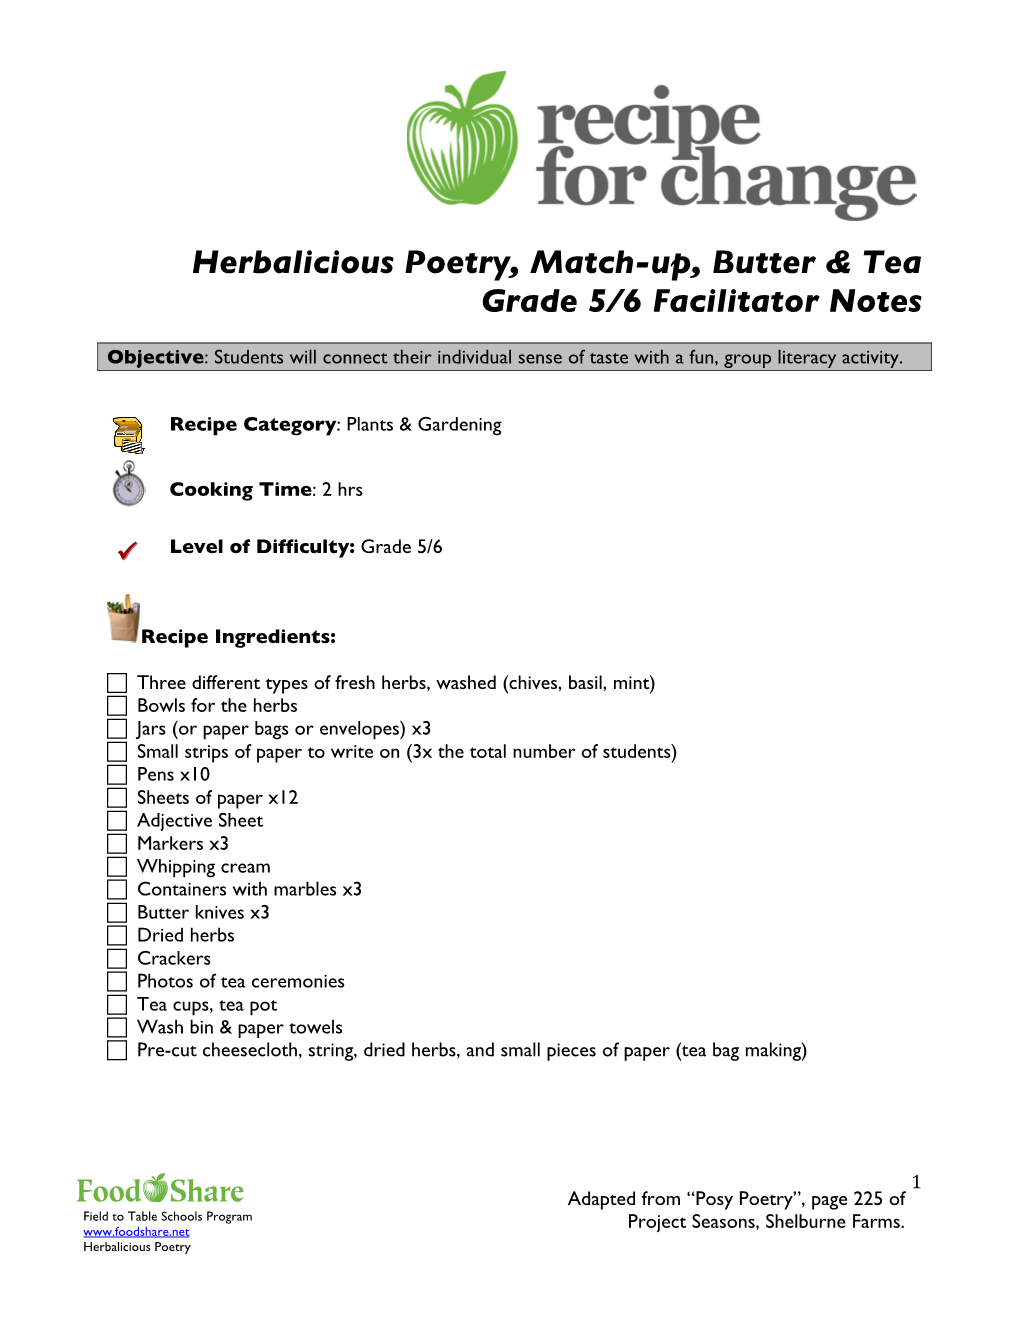 Herbalicious Poetry, Match-Up, Butter & Tea Grade 5/6 Facilitator Notes